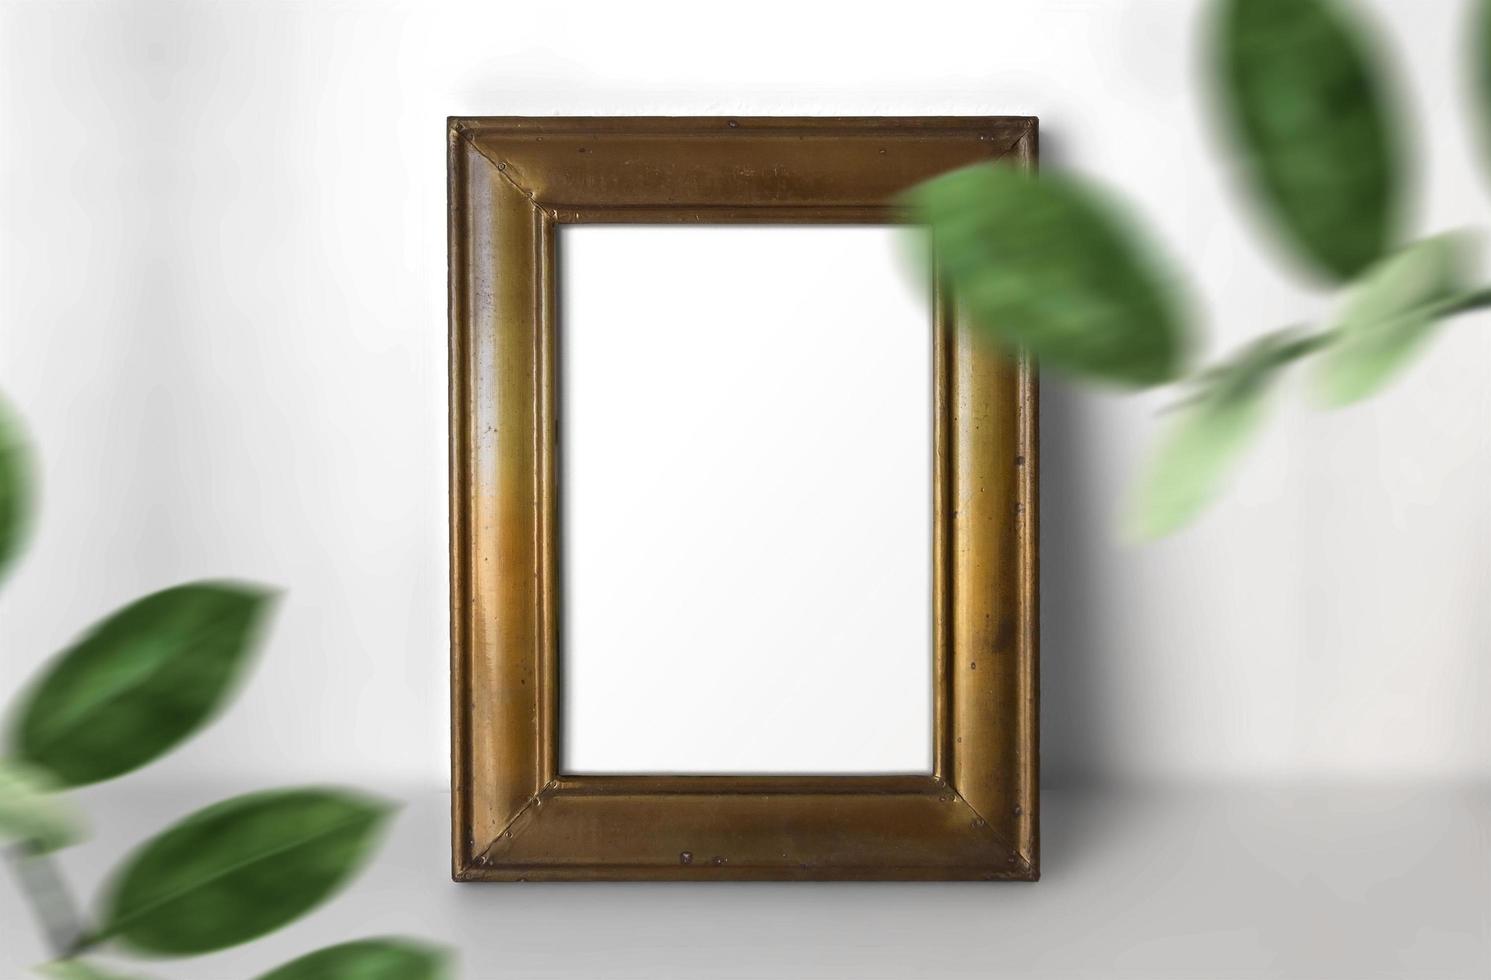 Vintage Frame Template Over White Background With Plants photo